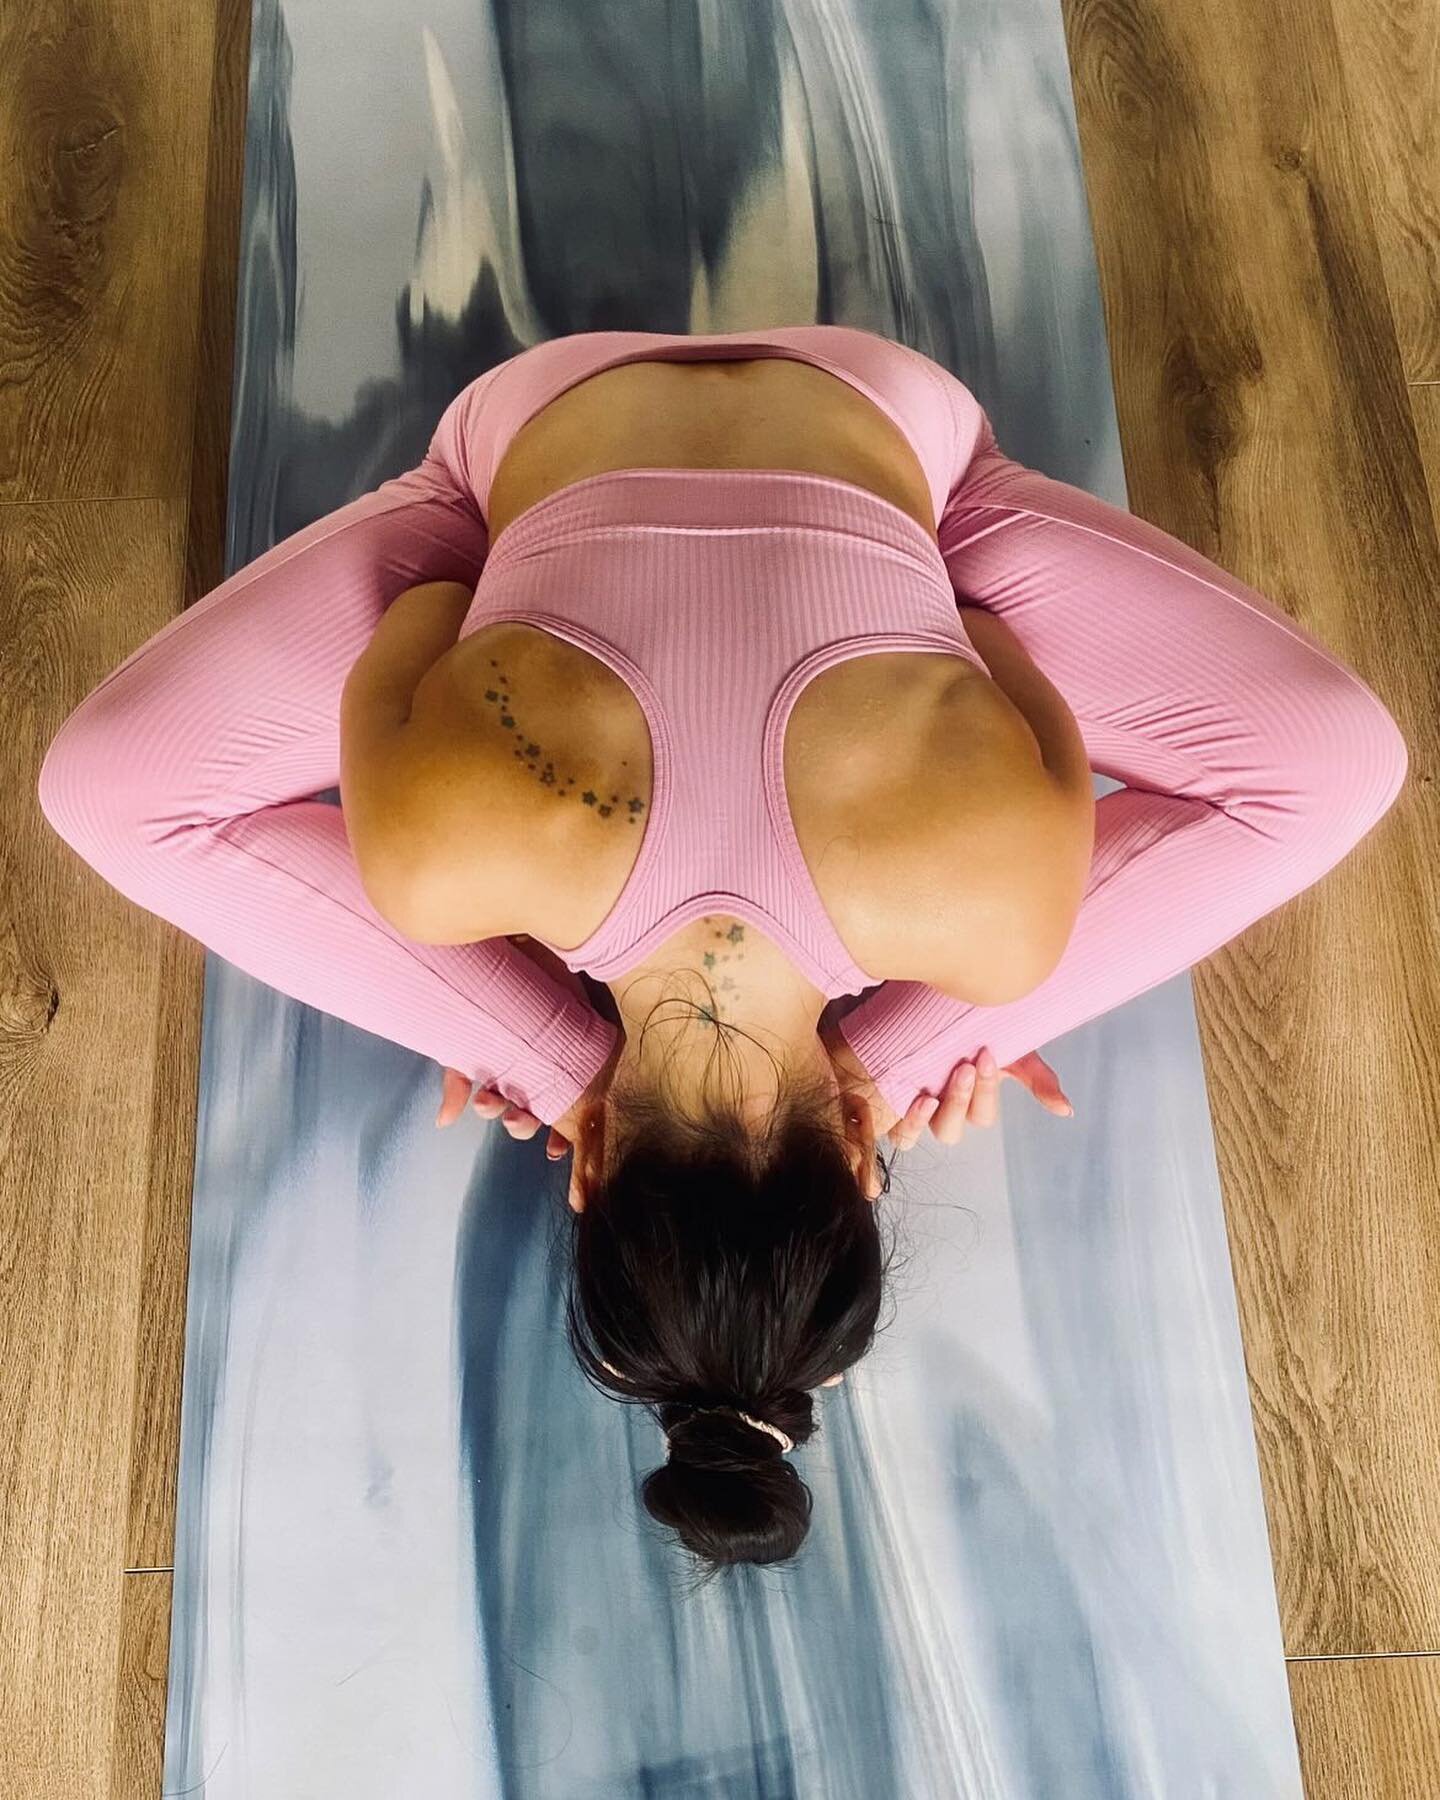 Butterfly pose targets the low back, hip, and thigh muscles, helping to reduce pain, encourage flexibility, and increase range of motion. Overall, Butterfly Pose has a soothing, relaxing effect both physically and mentally and may help boost energy l